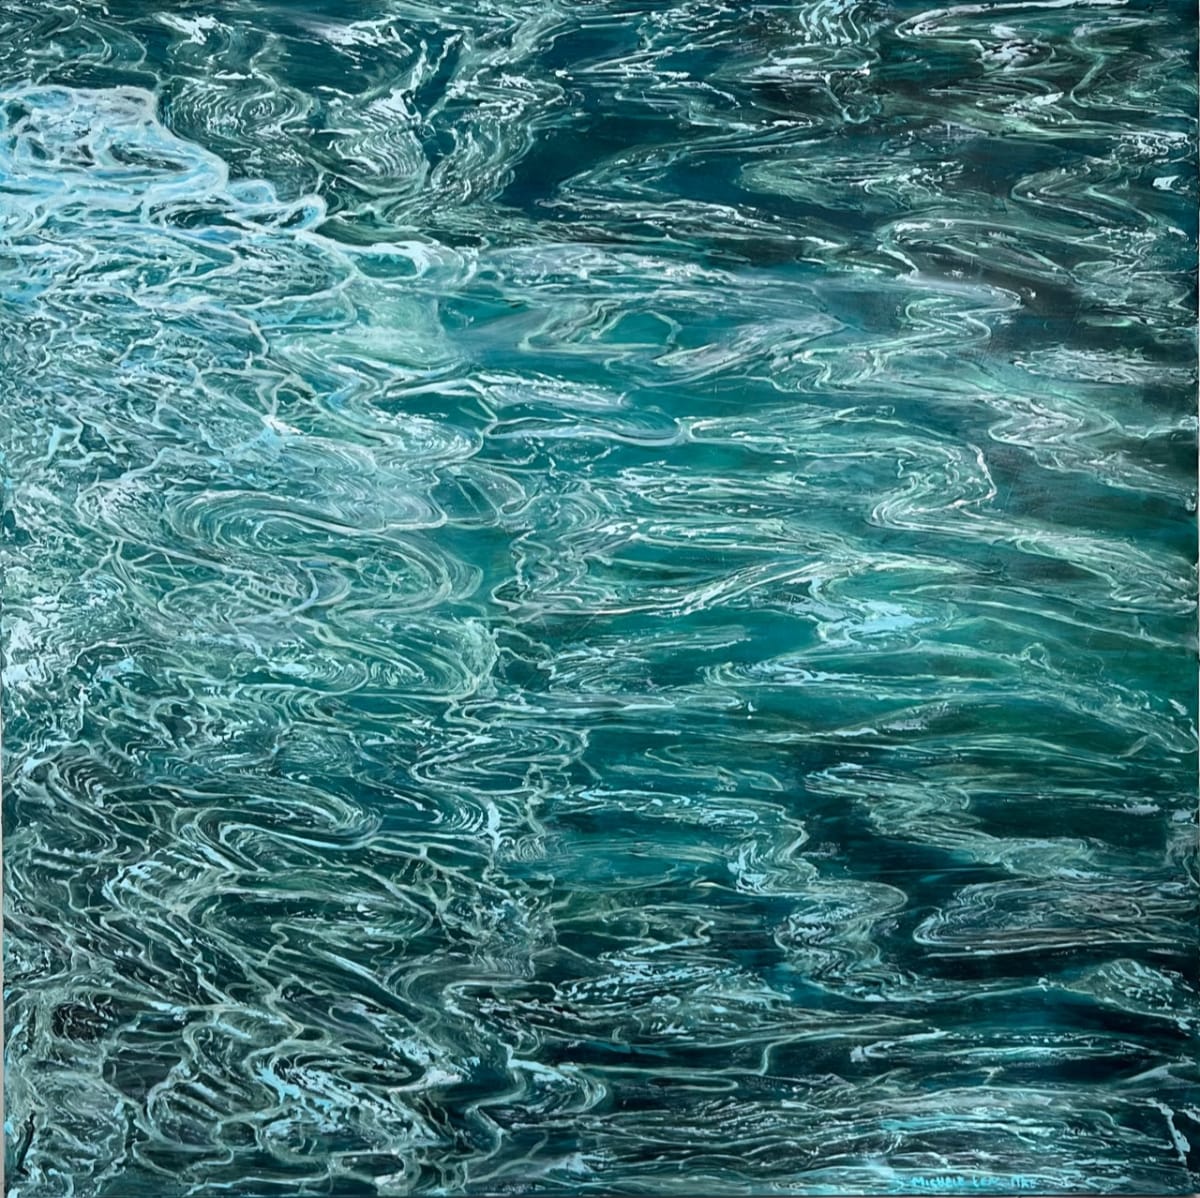 SHALLOWS by Michele LeMaitre  Image: Original 2D Interactive Sculptural Mixed Media on cradled wooden panel. This piece slightly glows in the dark.  Edges painted a dark turquoise blue. 